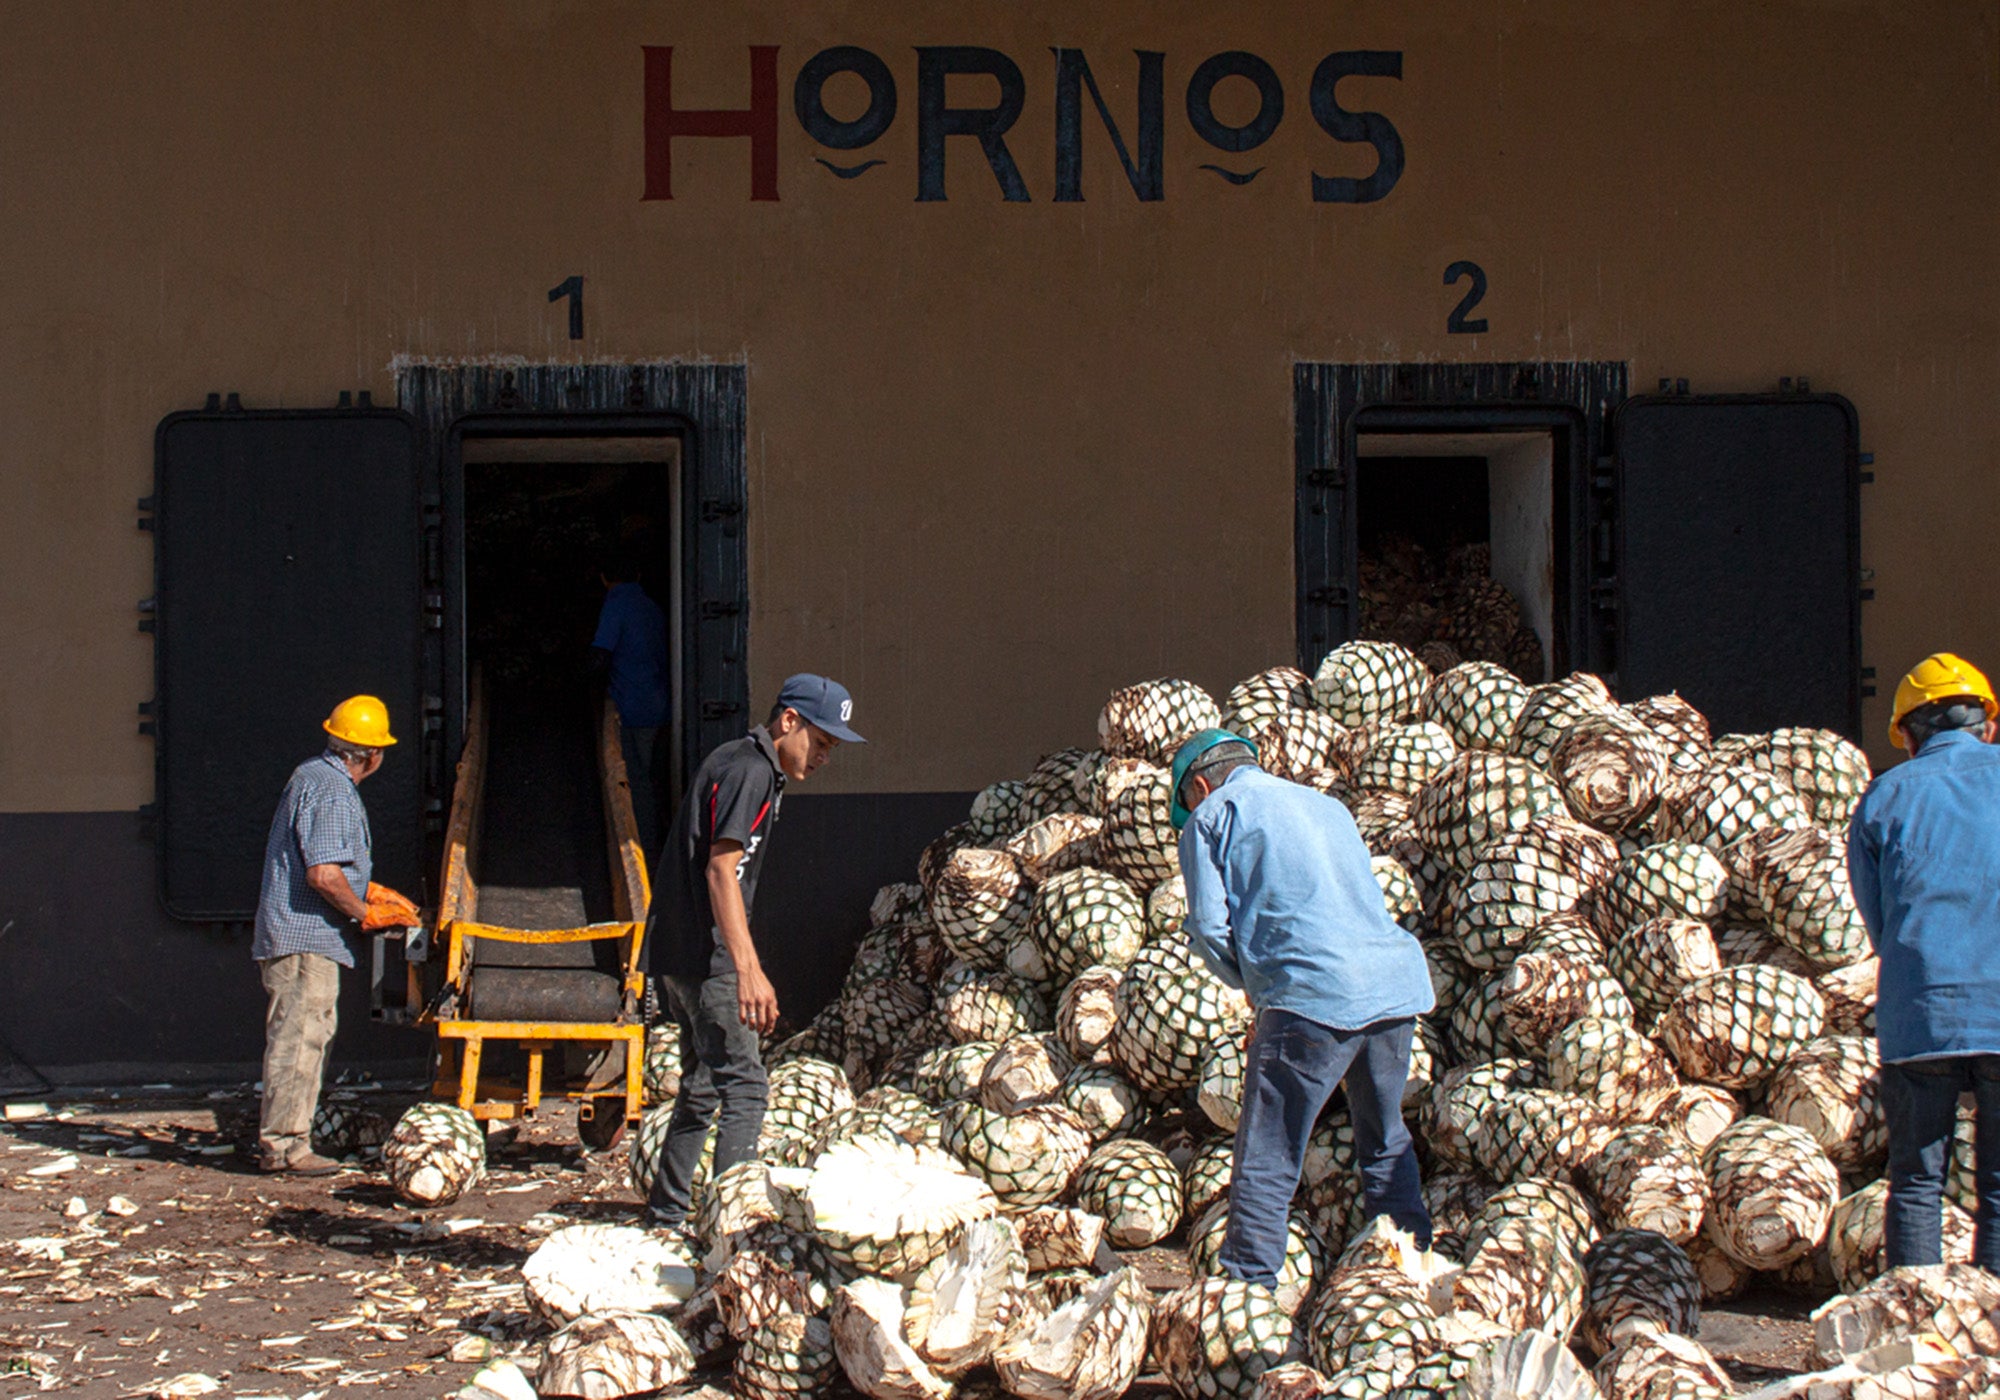 Workers at Casa Maestri Distillery load Agave piñas into hornos, traditional ovens to cook the Agave.